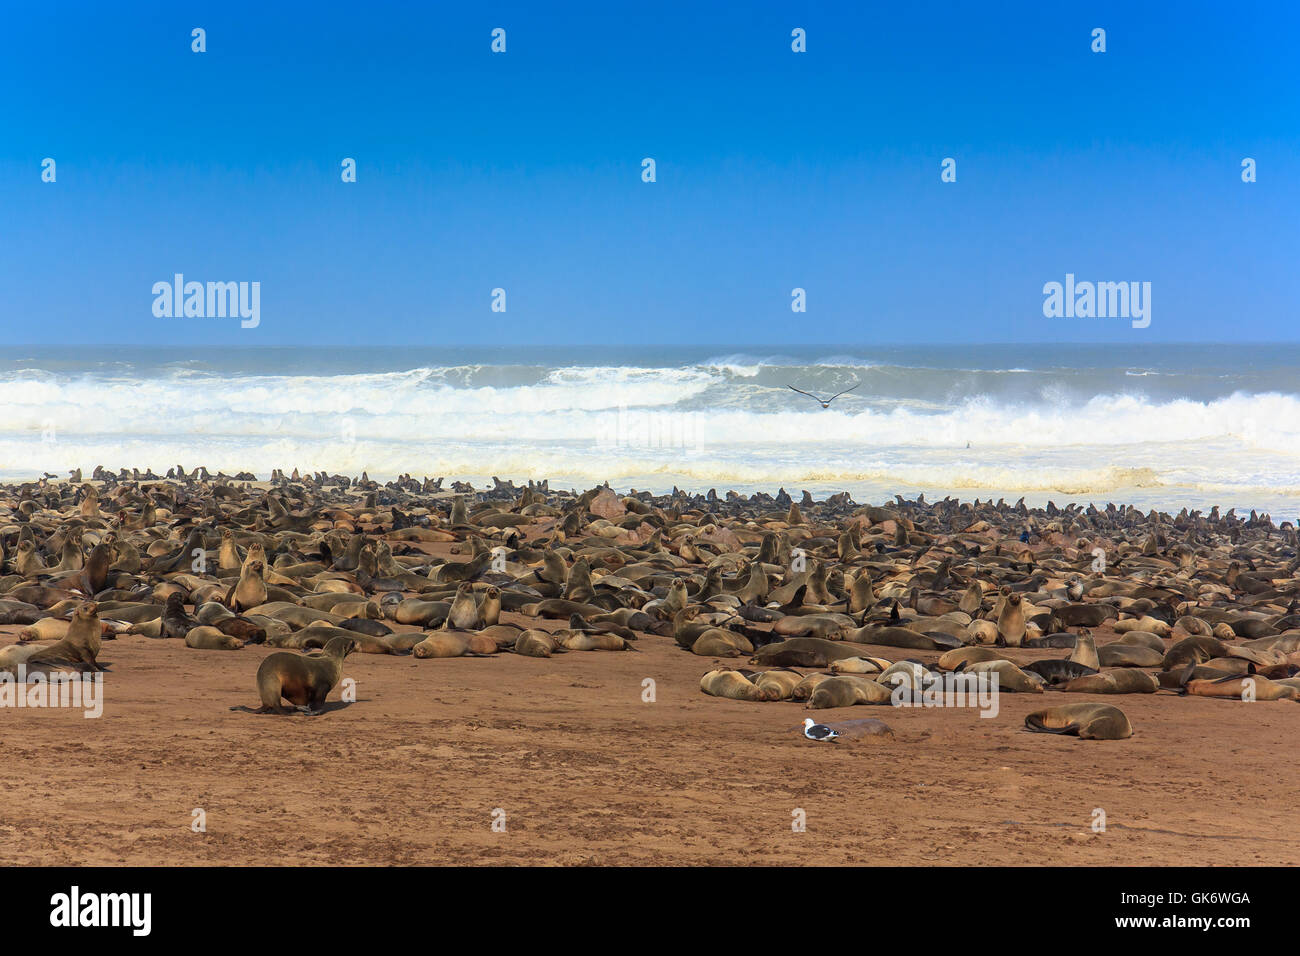 Cape fur seal group on the beach of Cape cross. Rough atlantic ocean Namibia Africa. Stock Photo